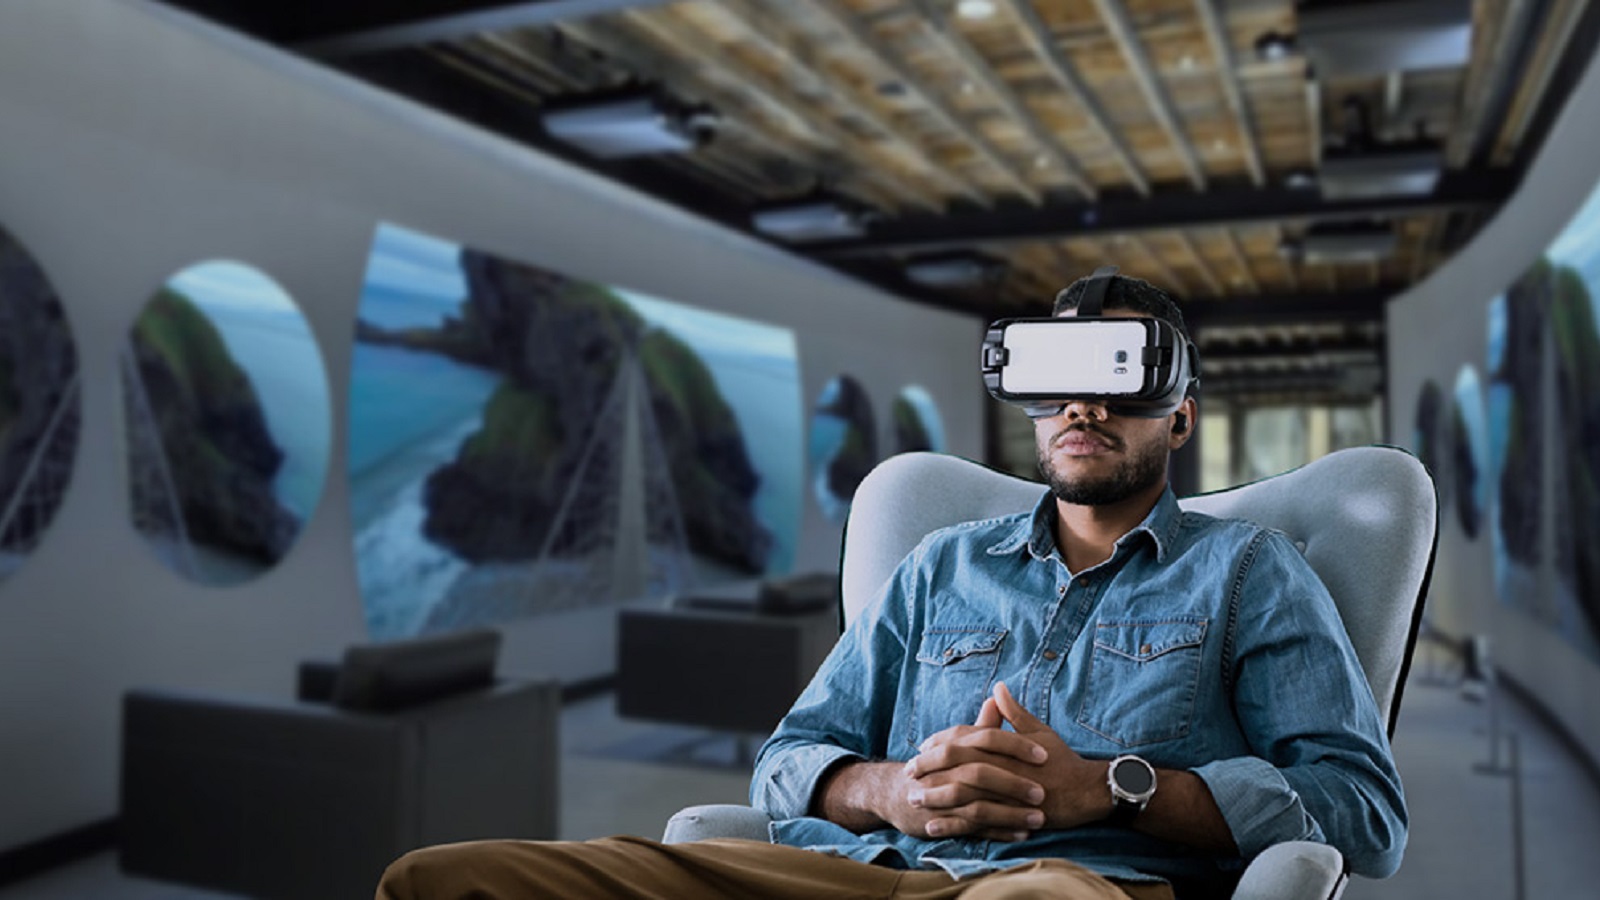 #TBT: Samsung’s VR Technology Helps Millennials Overcome Their Real-Life Phobias